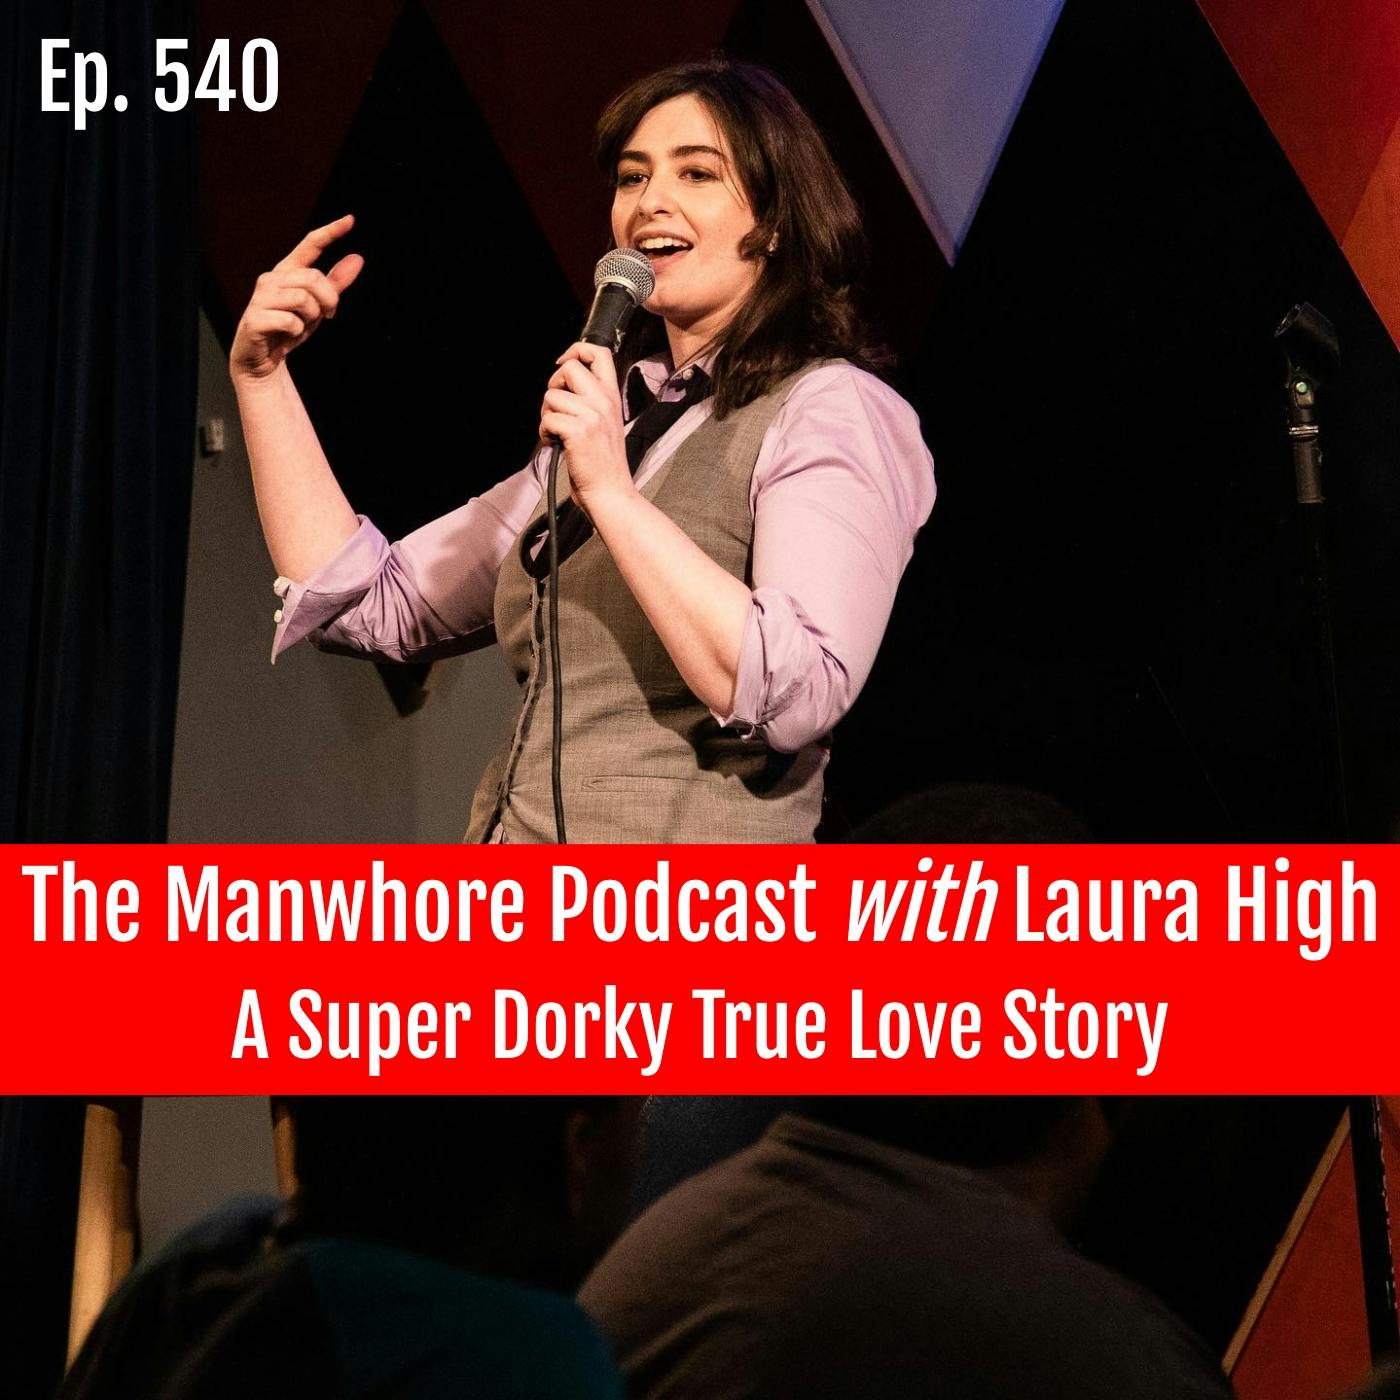 Ep. 540: Post-Divorce Love, Pick-Me Girls, and Bumble Fumbles with Laura High